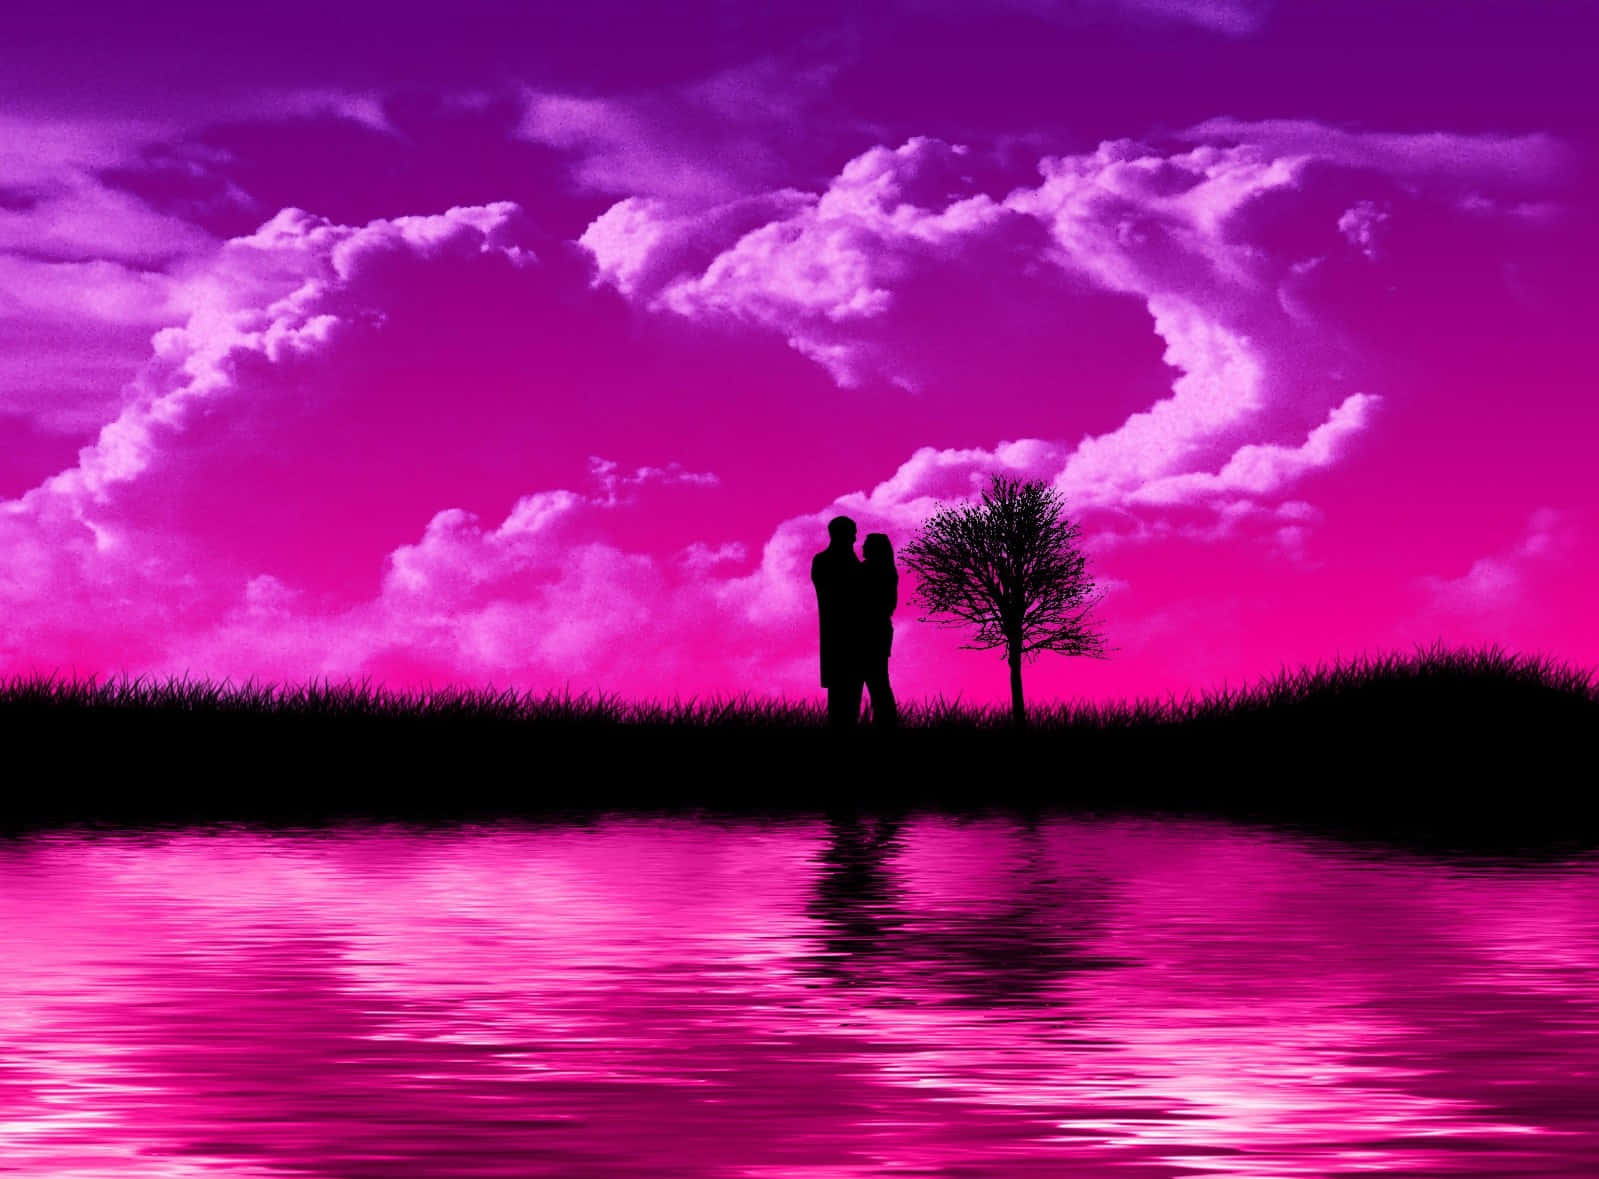 romantic love pictures wallpapers hd